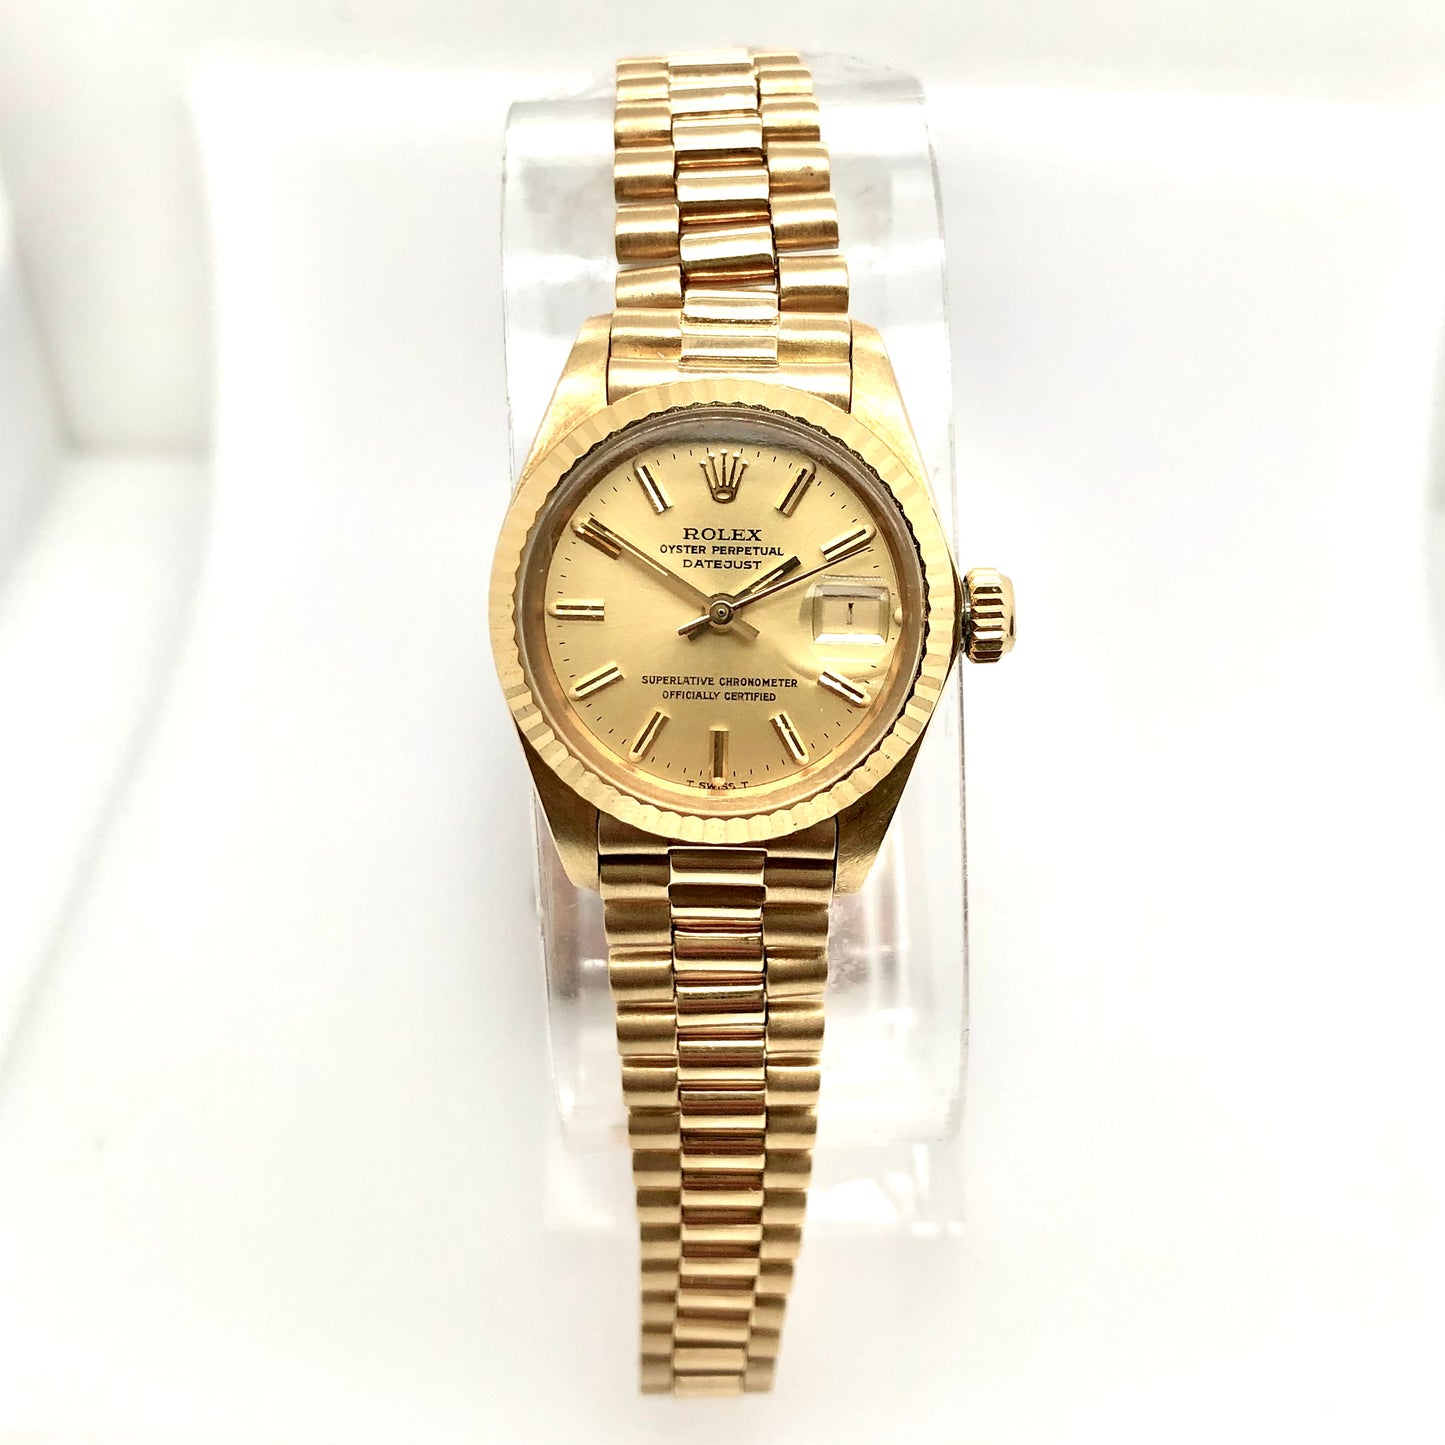 ROLEX OYSTER PERPETUAL DATEJUST Presidential Automtic 26mm 18K Yellow Gold Watch